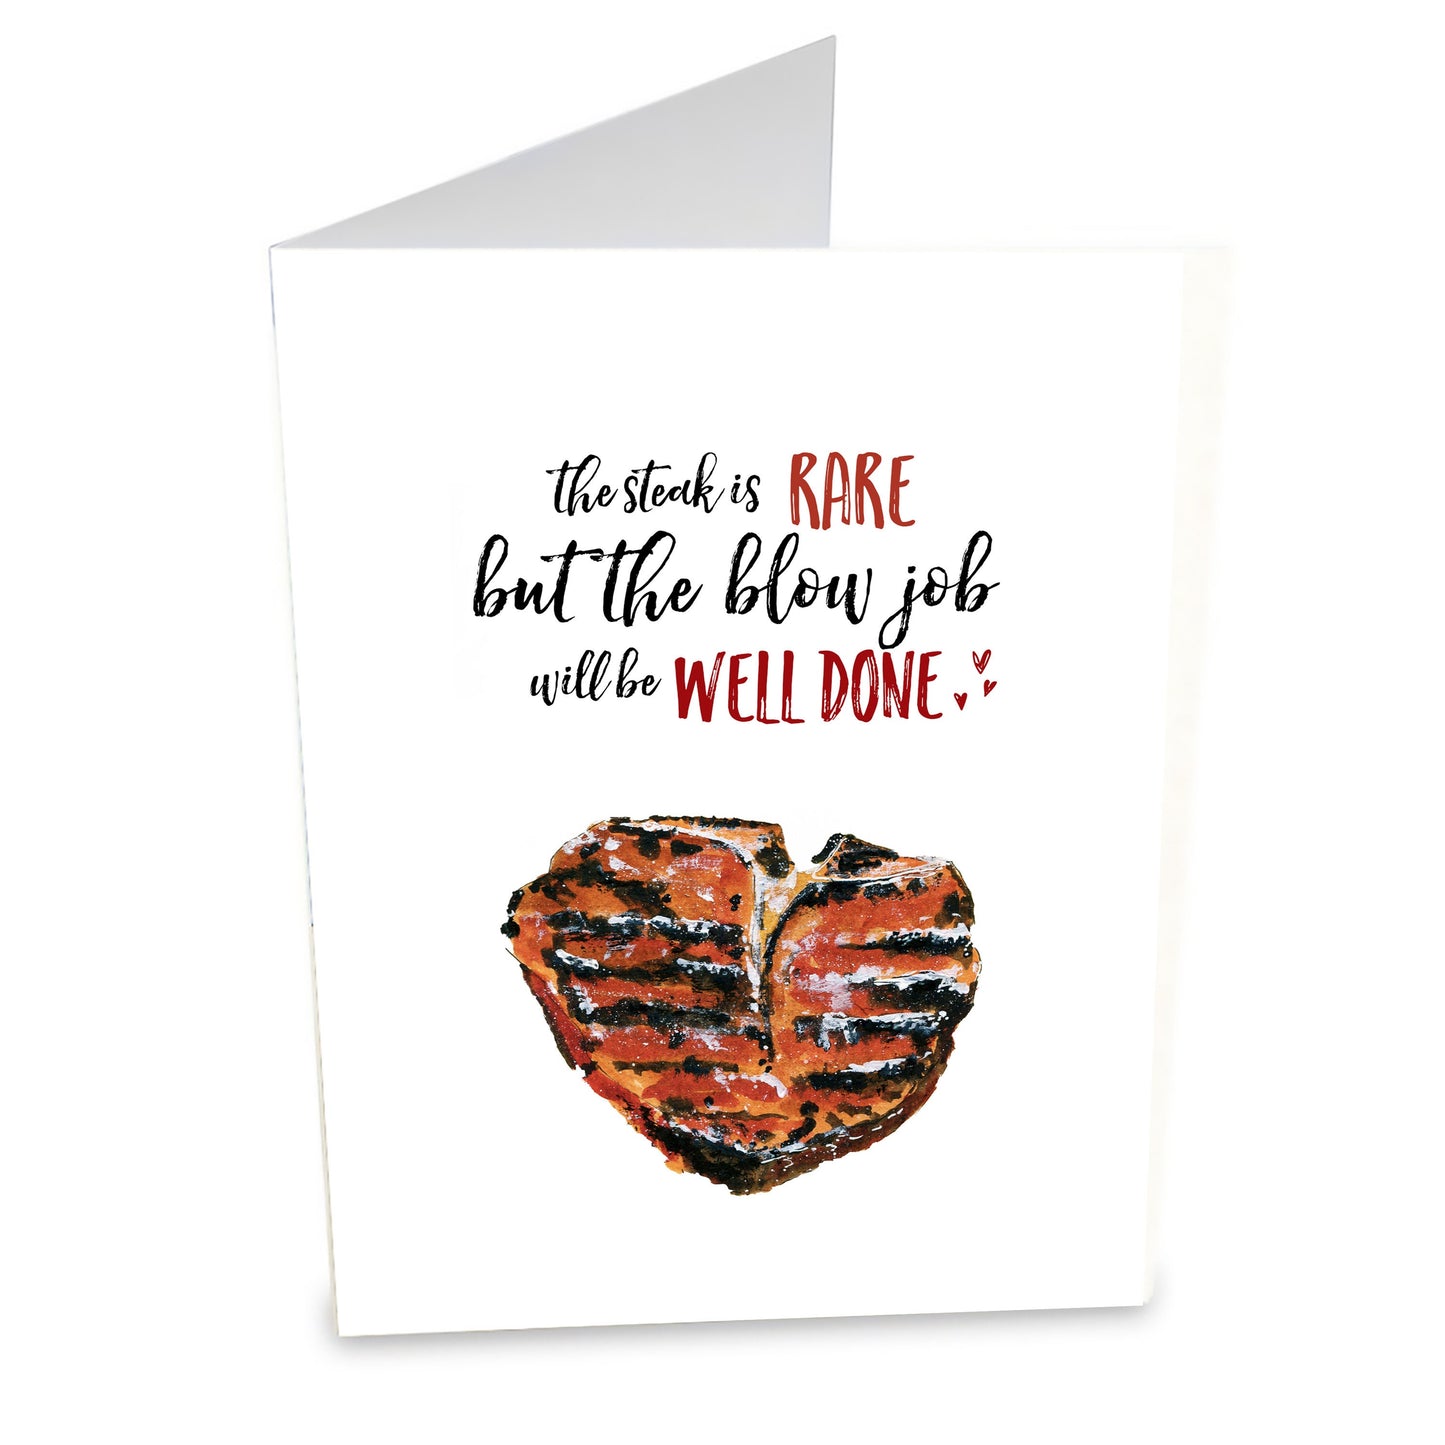 Steak and Blowjob Love Day Card For Boyfriend, Funny Steak Love Card For Him, Funny Love Card For Husband, Naughty Valentines Card